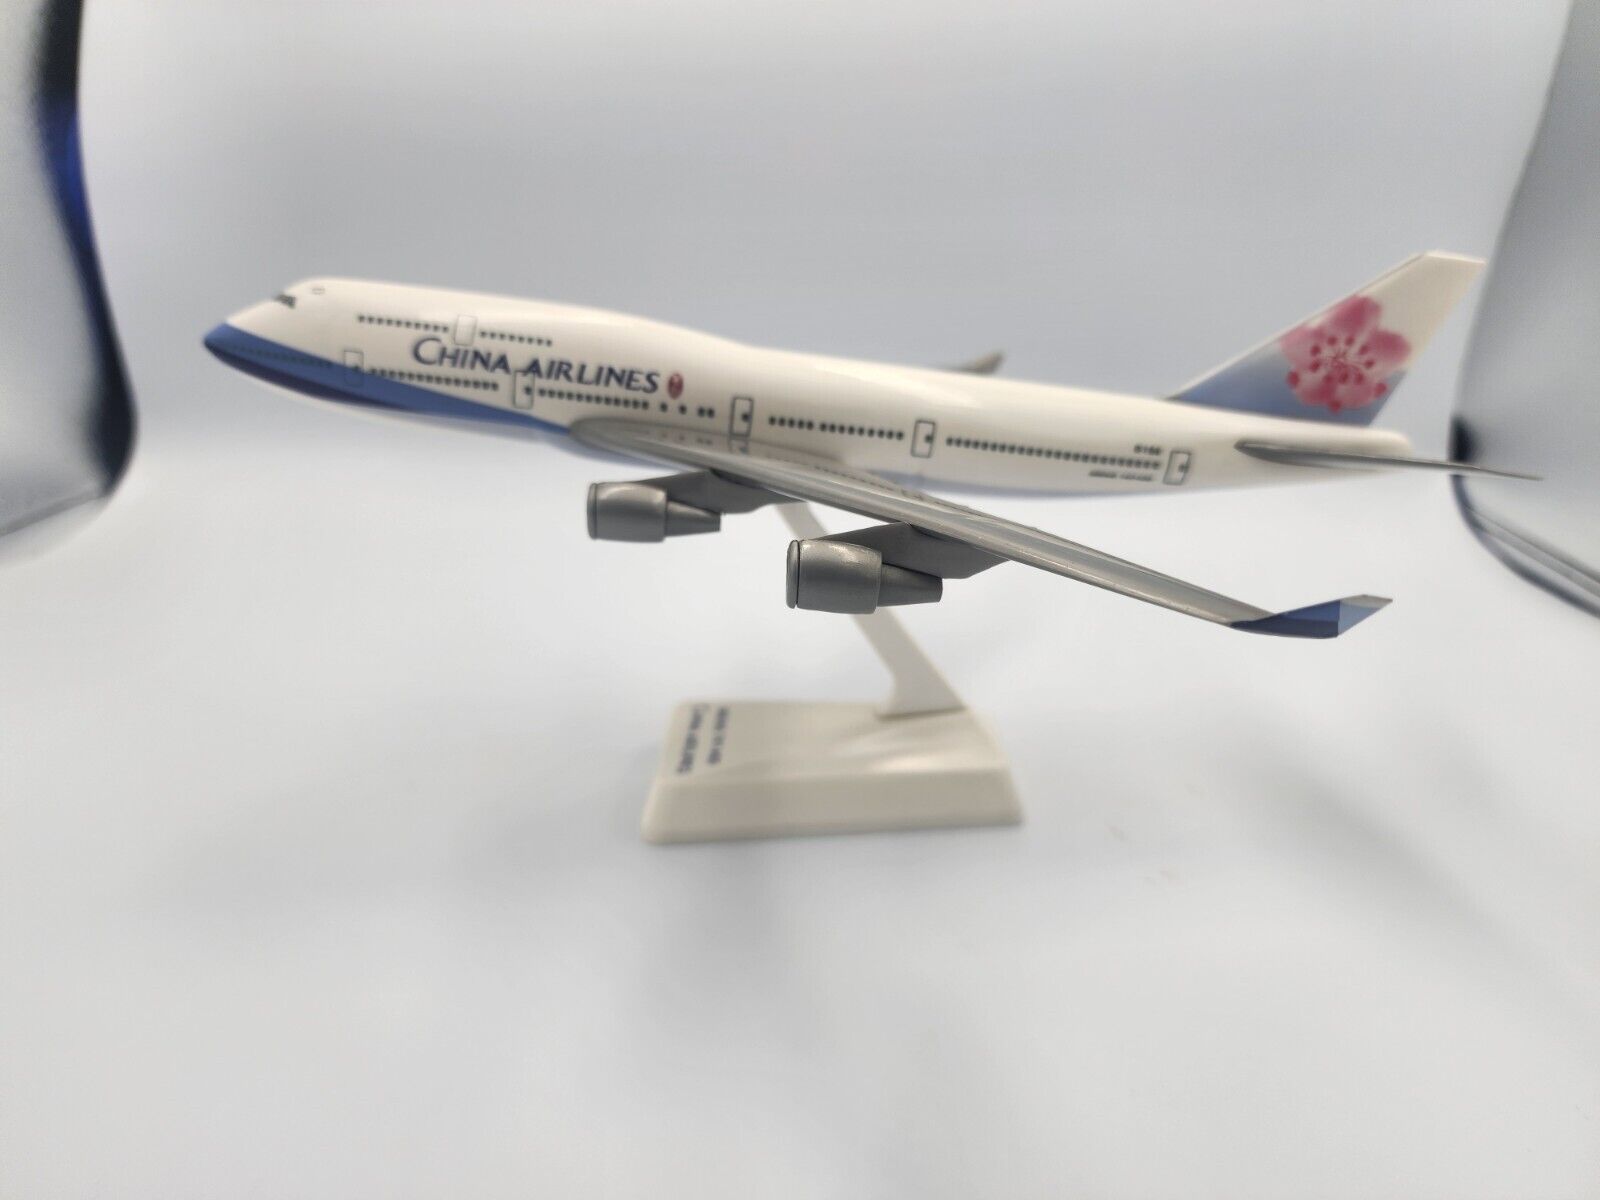 Air China Boeing 747-400P B-164 Scale 1/200 with stand